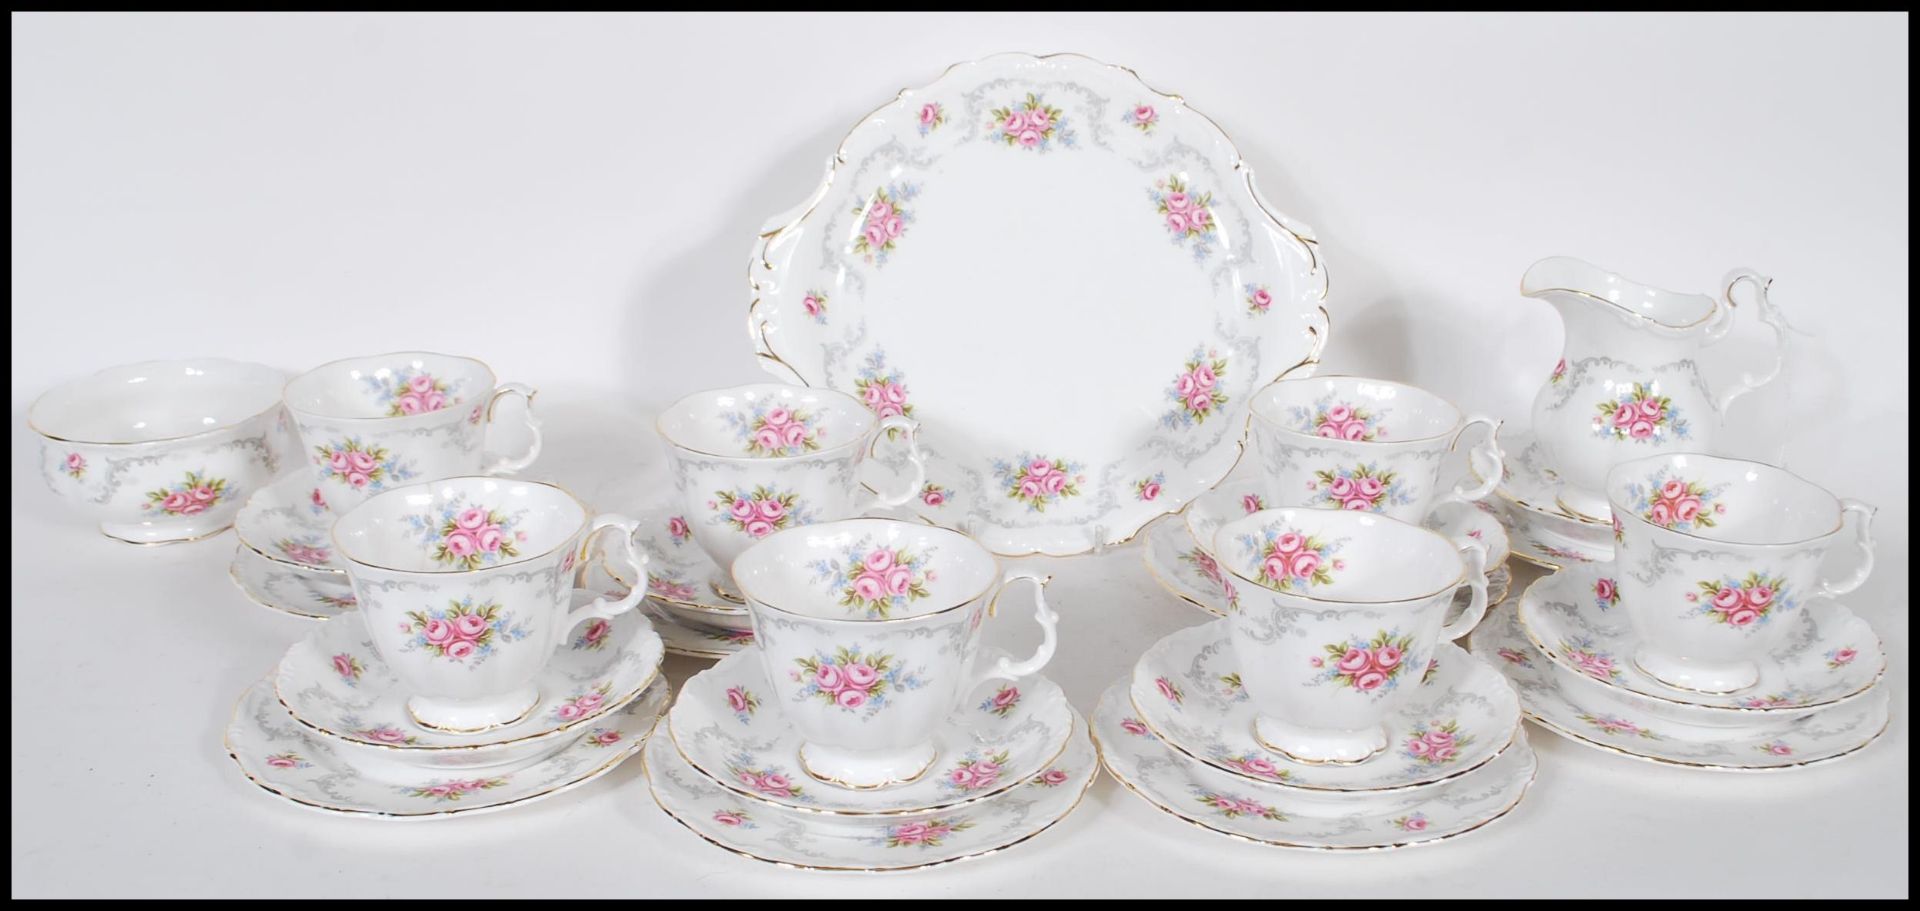 A Royal Albert tea service in the Tranquillity pattern having floral and gray foliate decoration - Image 2 of 8